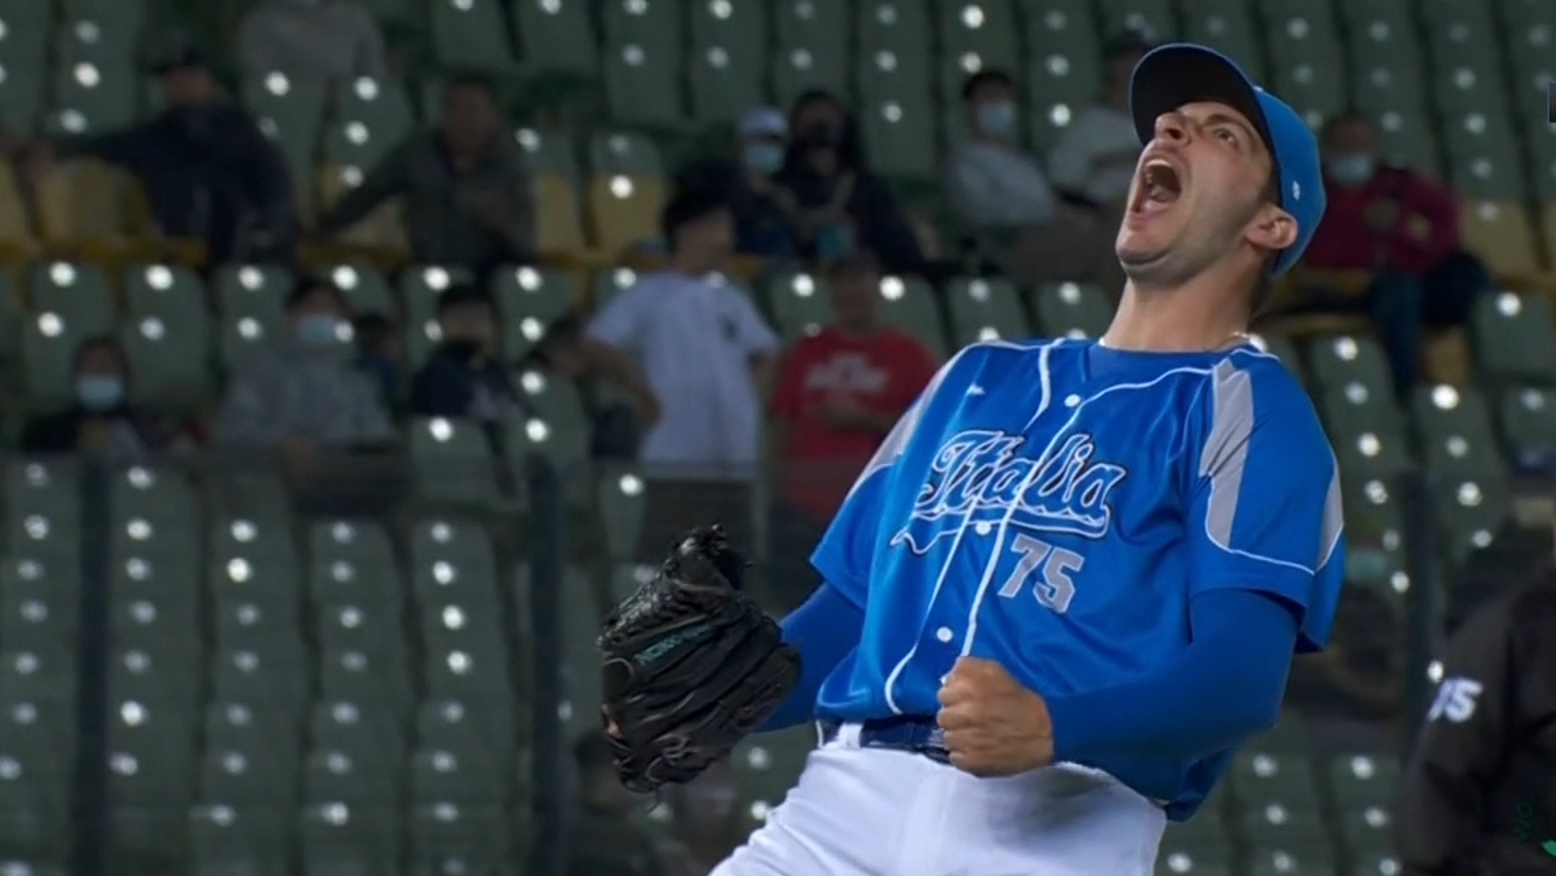 Im him! Italys Joe LaSorsa is fired up after a huge strikeout - Stream the Video